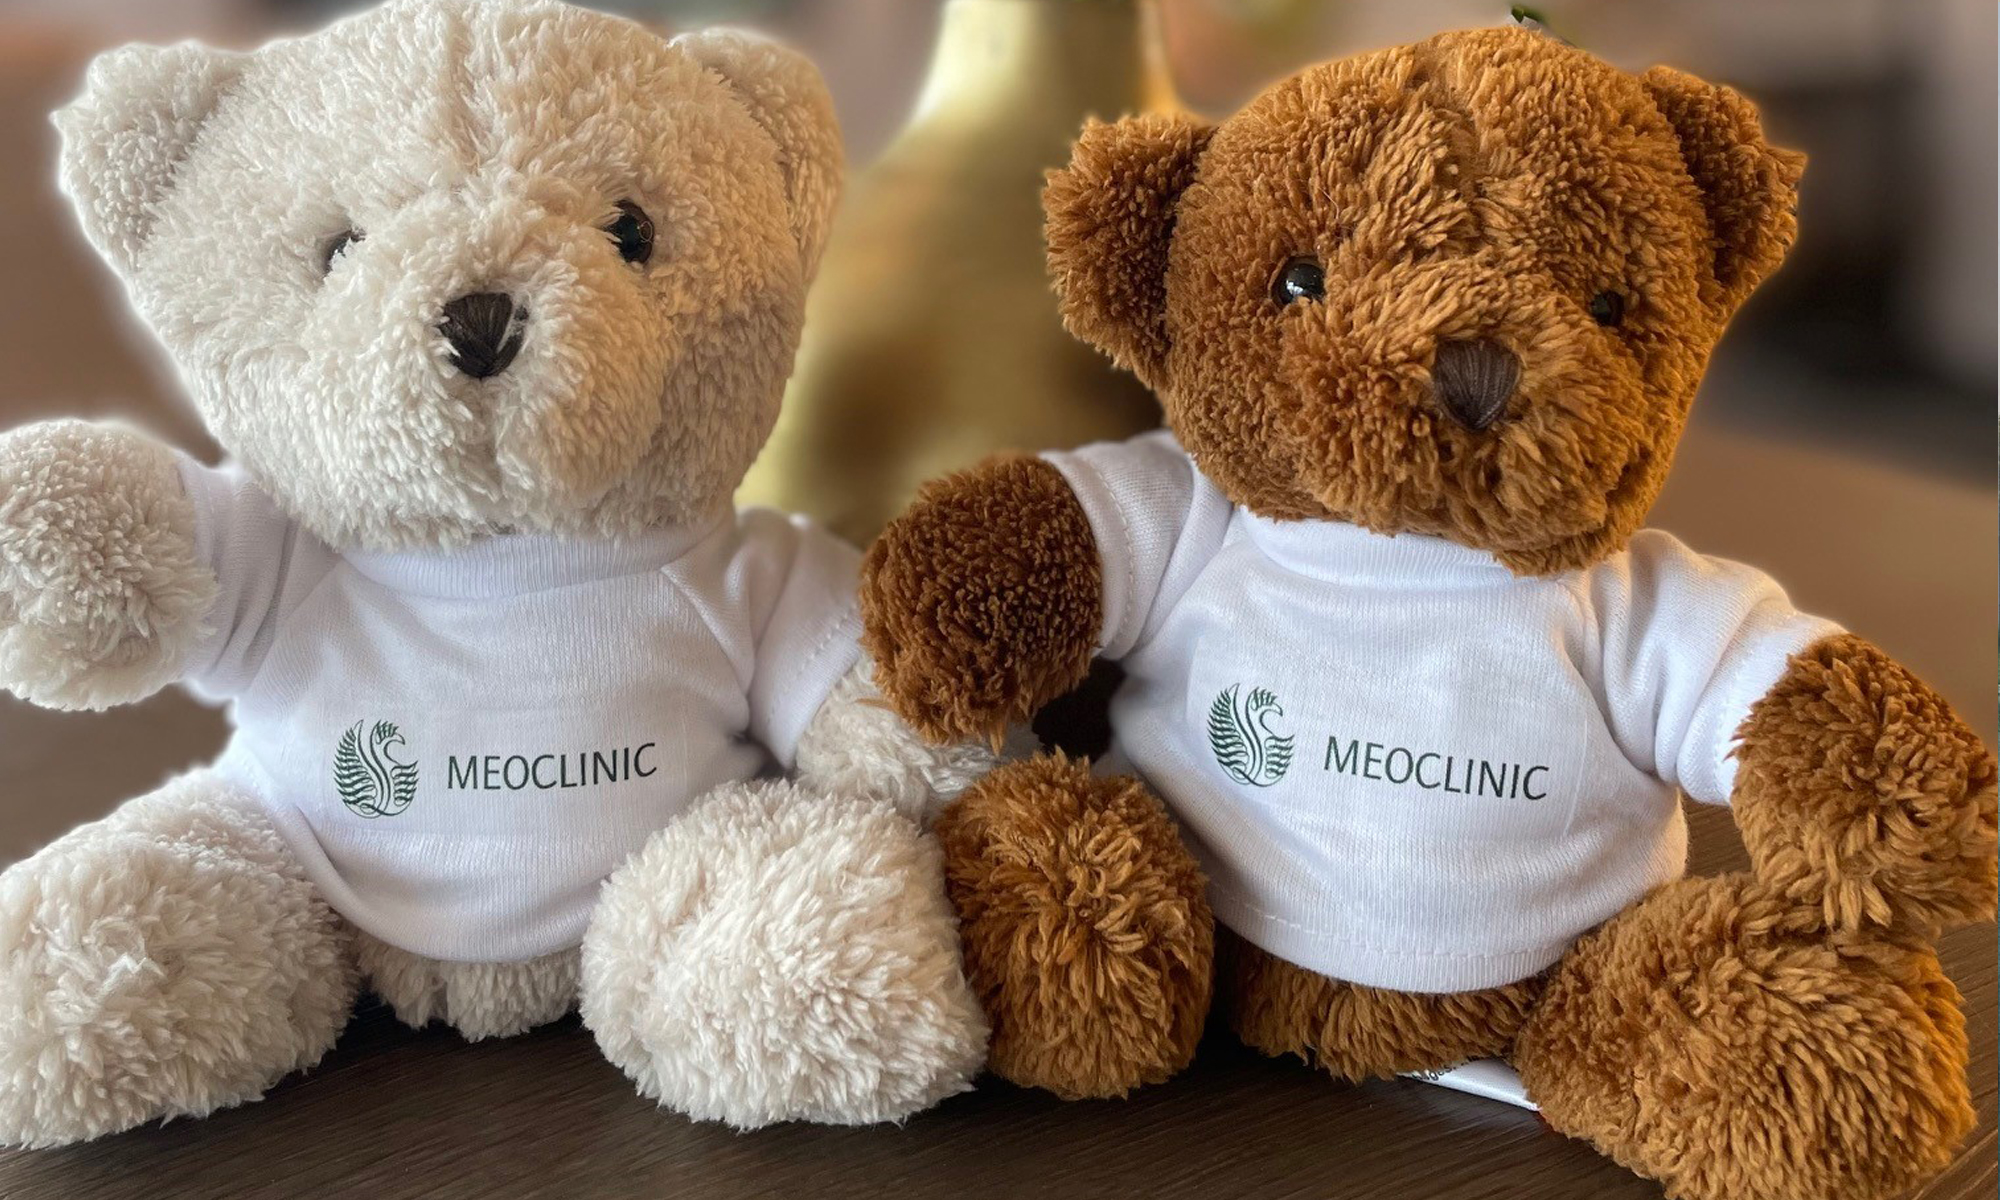 Meoclinic cooperation with Björn Schulz Foundation